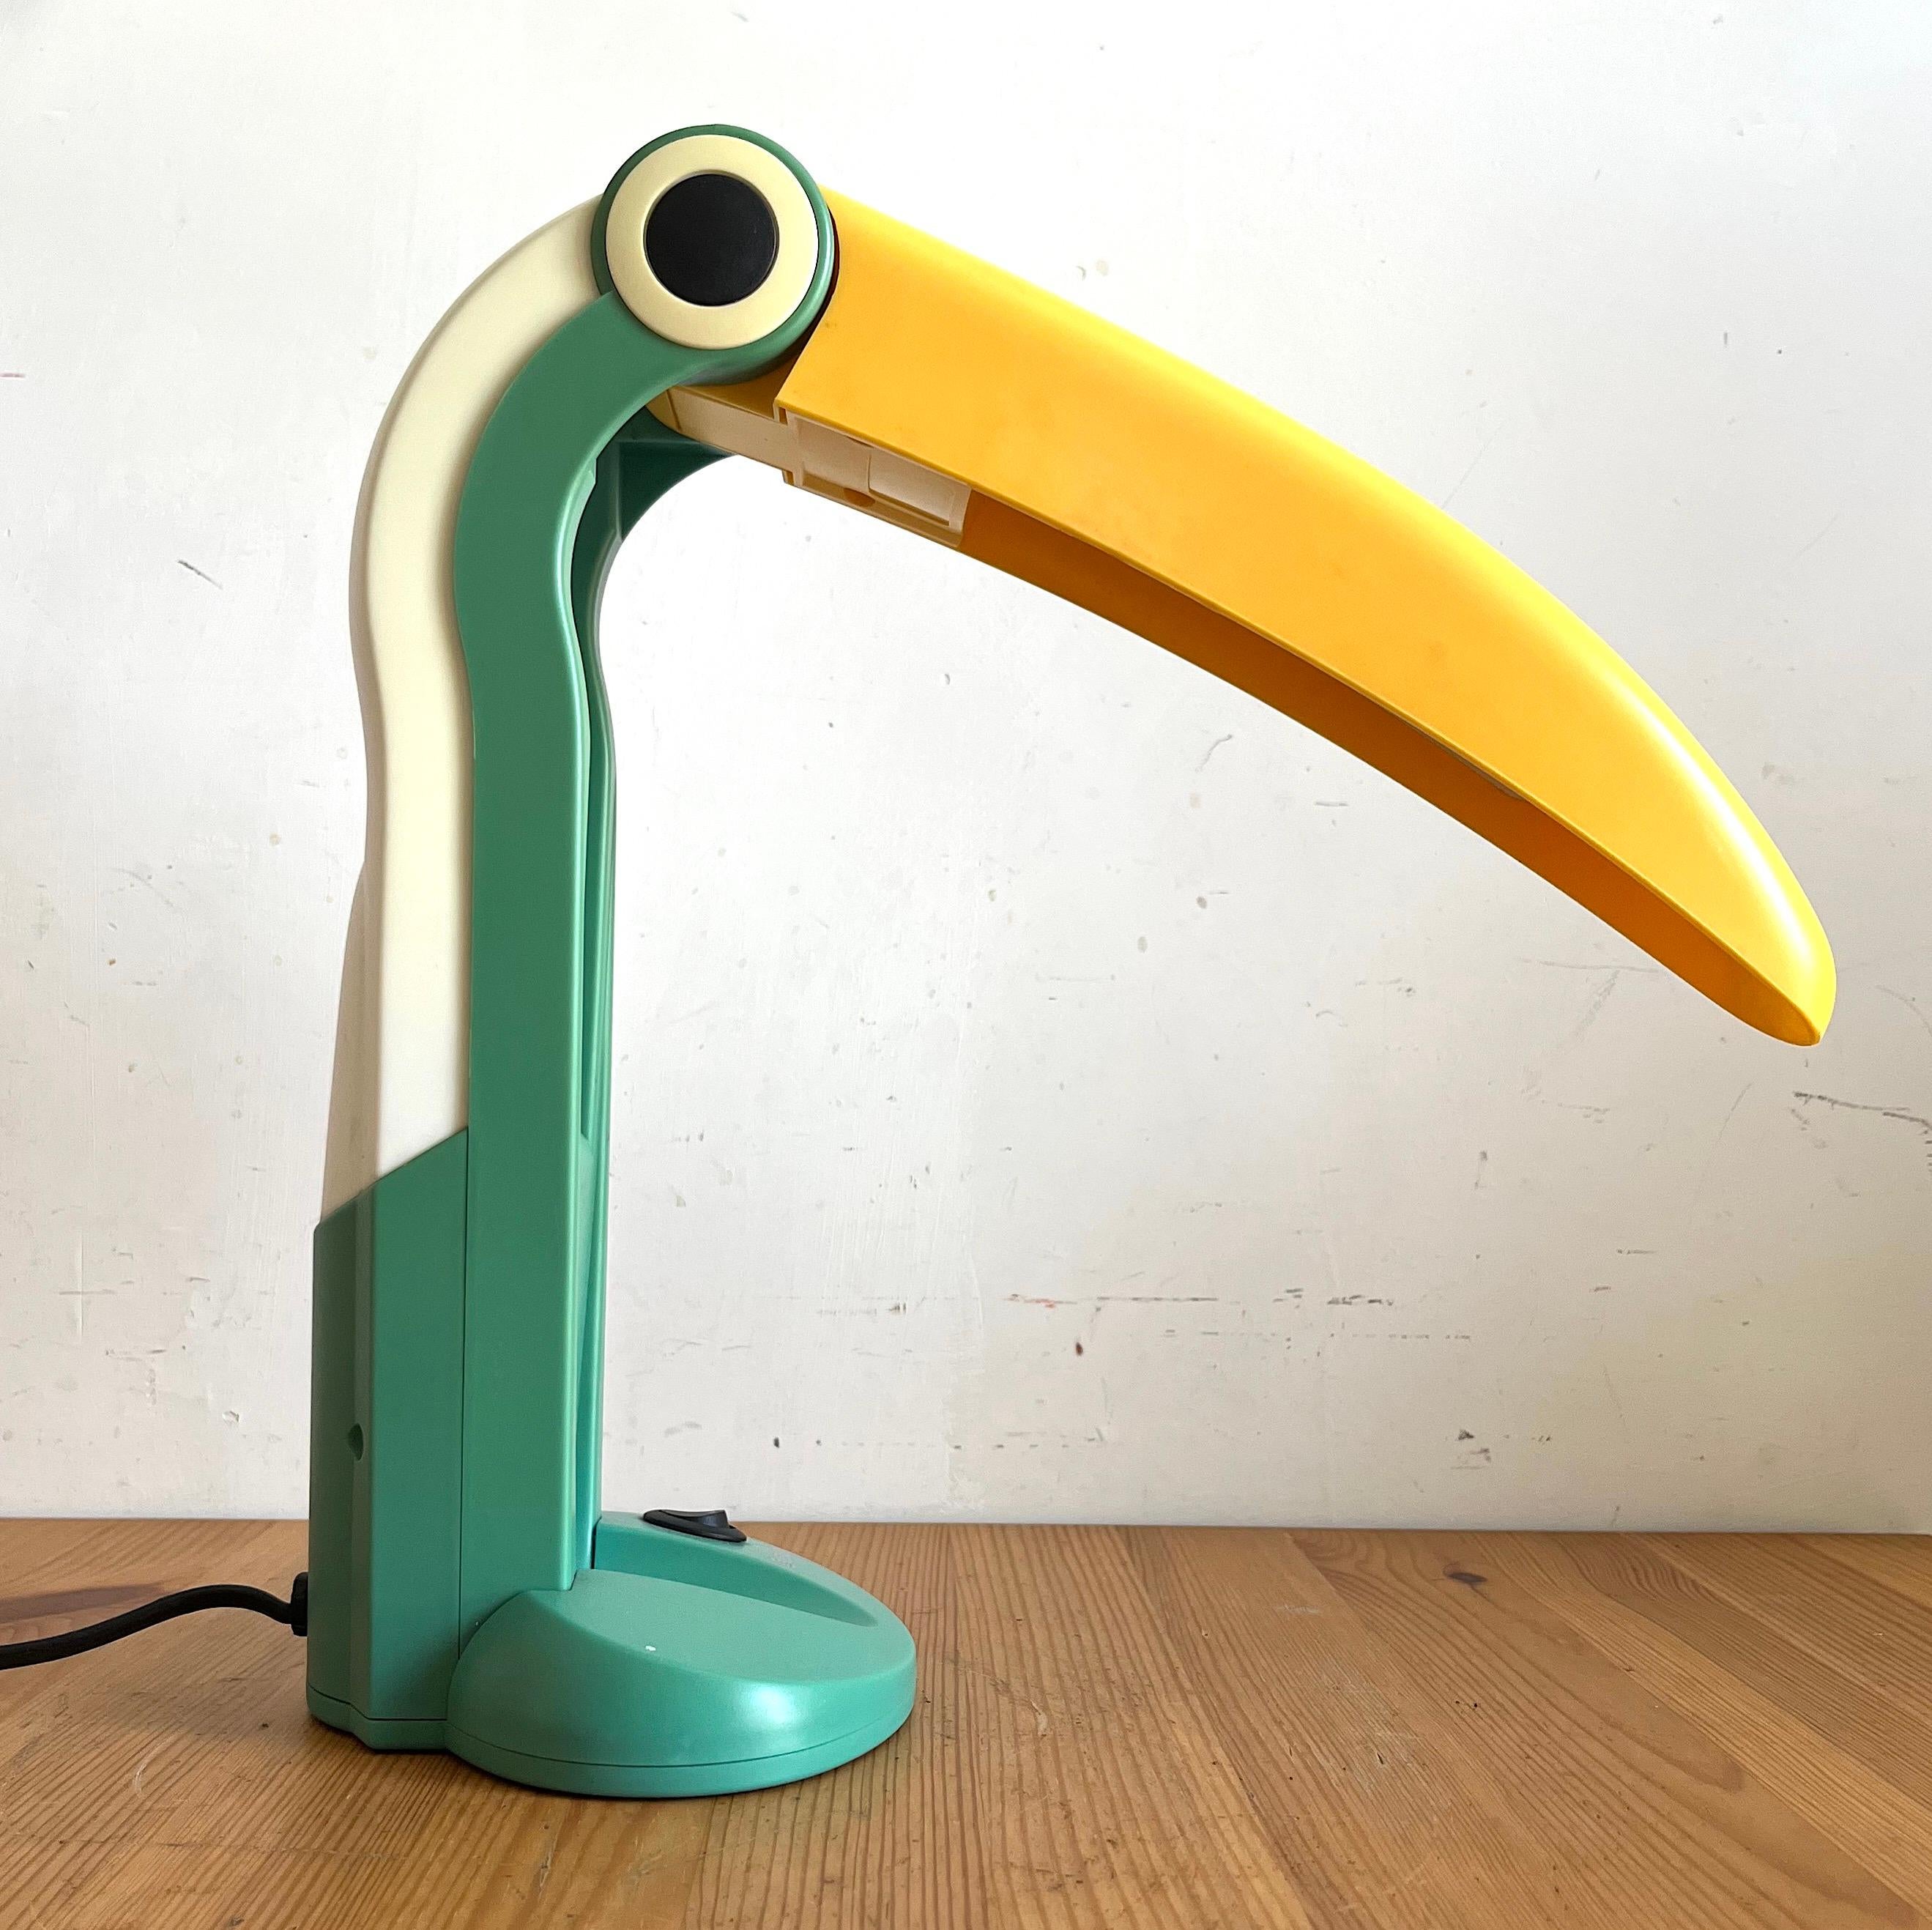 Gorgeous desk lamp designed by HT Huang for Huangslite. This piece has a distinctive yellow beak which combined with the green and white structure creates a whimsical combination that evokes the atmosphere and creativity of the 80s.
Manufactured